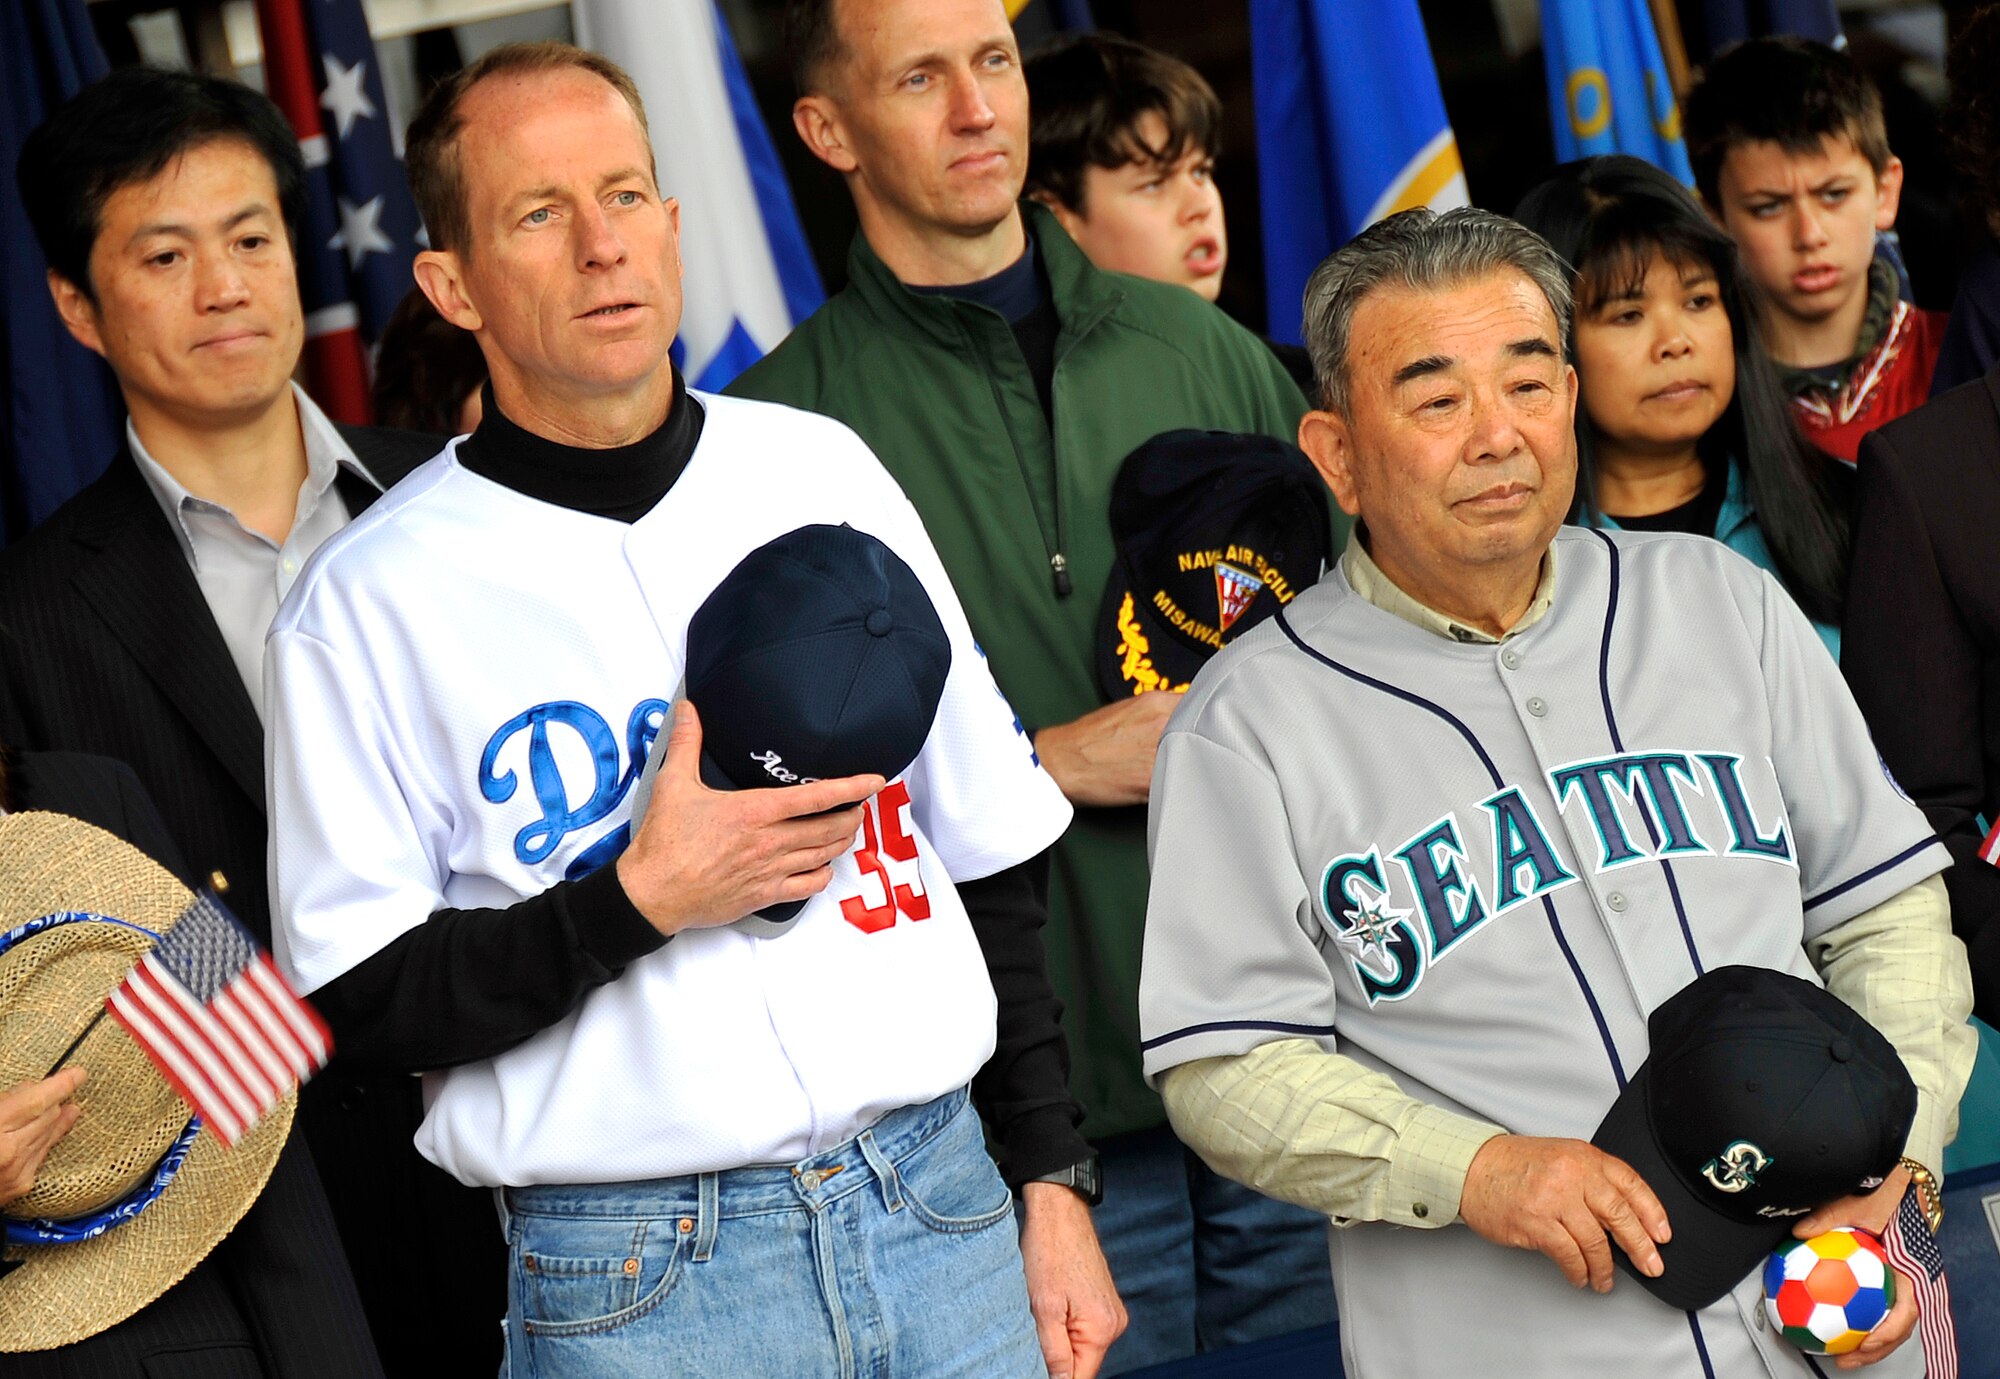 MISAWA AIR BASE, Japan -- Col. David Stilwell, 35th Fighter Wing commander, and Misawa City Mayor Kazumasa Taneichi, stand while the Japanese and American national anthems play during the American Day opening ceremony June 7, 2009. This marks the 21st annual American Day held in Misawa City. (U.S. Air Force photo by Senior Airman Chad C. Strohmeyer)